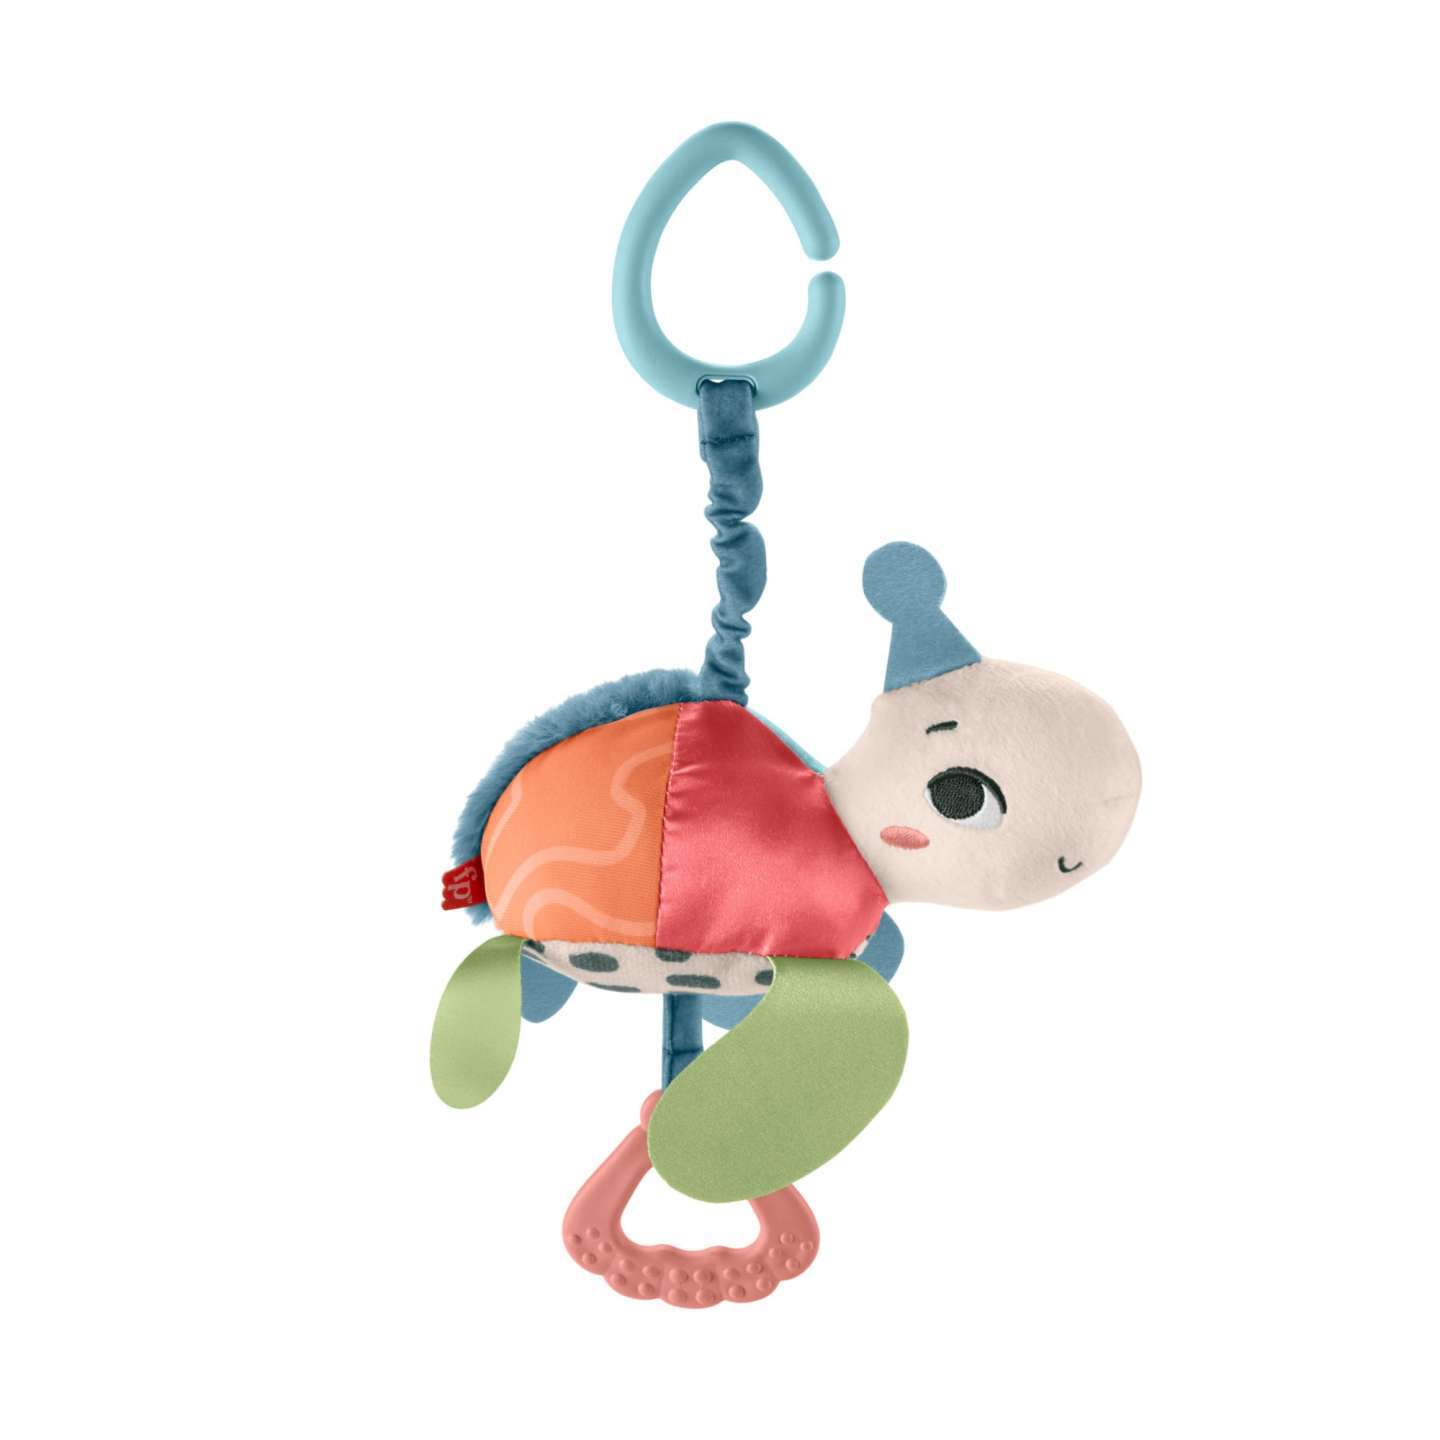 Fisher Price Planet Friends - Sea Me Bounce Turtle